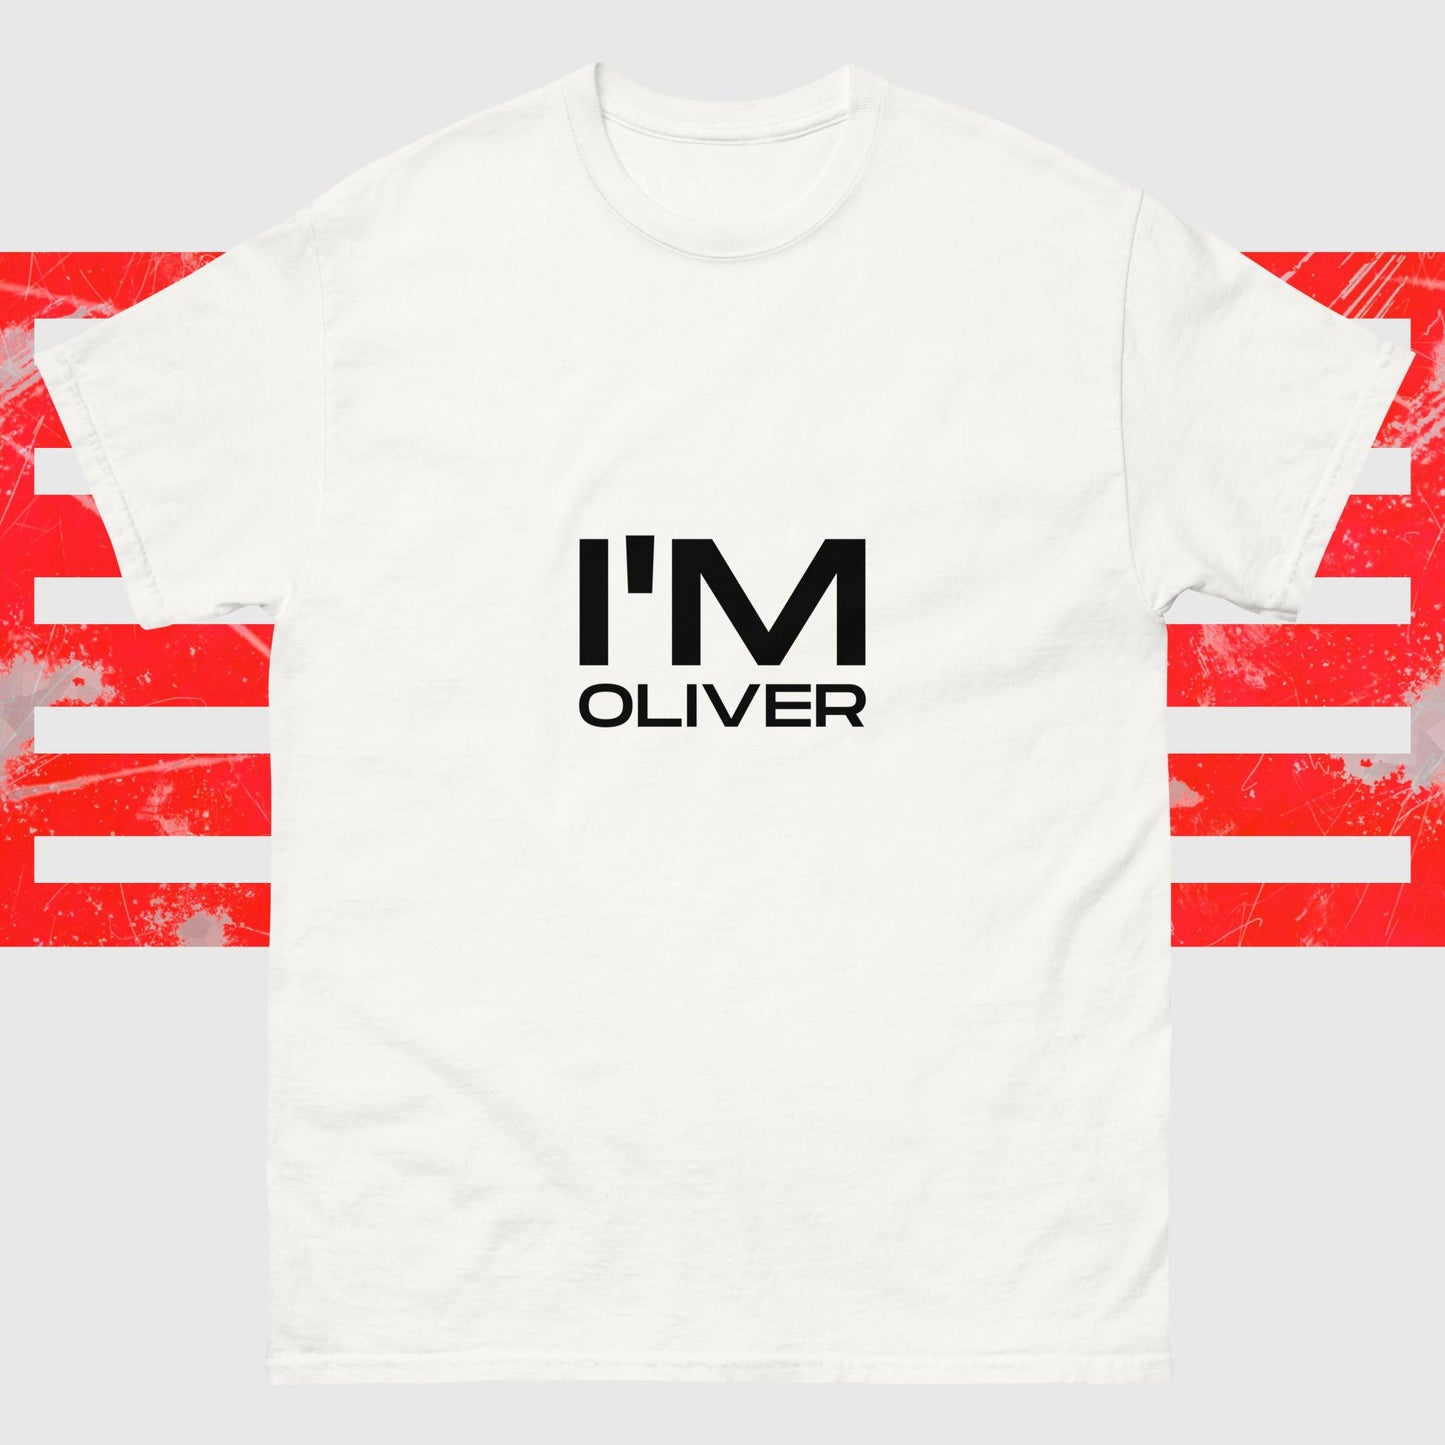 MENS PATRIOTIC T-SHIRT OLIVER WHITE FRONT - www.firstamericanstore.com